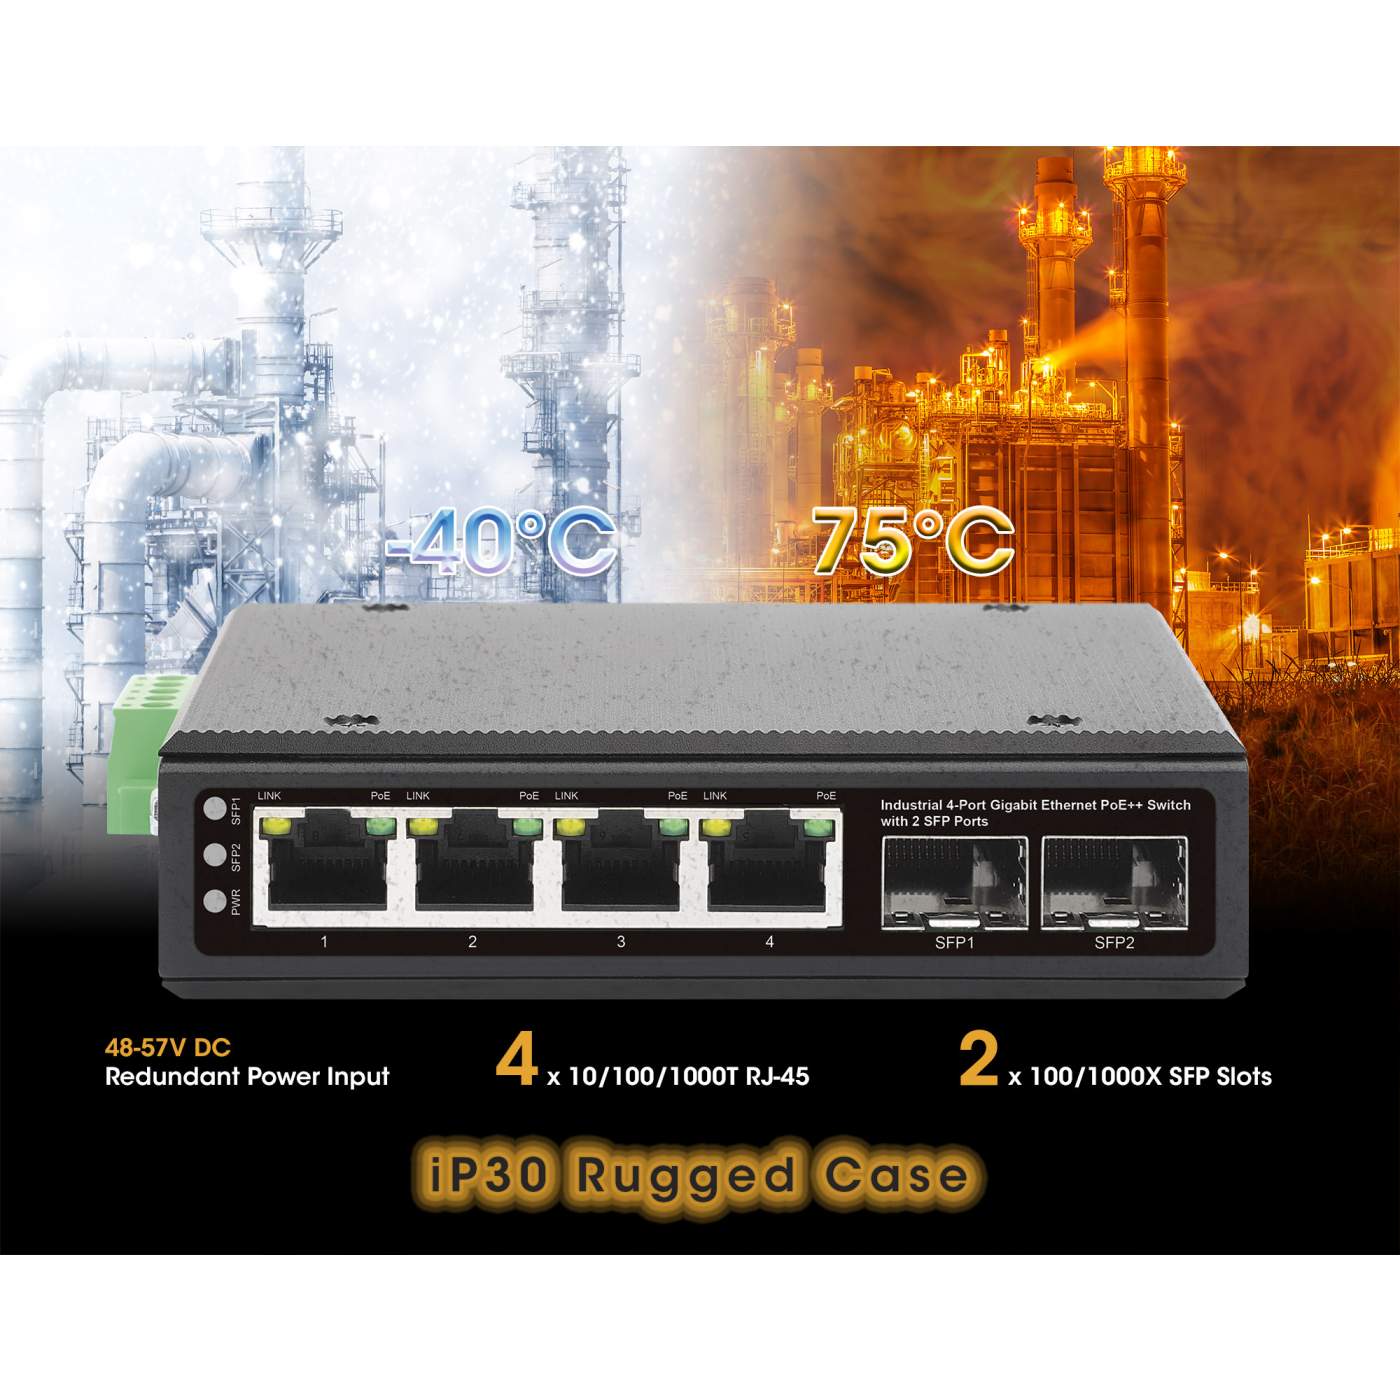 Industrial 4-Port Gigabit Ethernet PoE++ Switch with 2 SFP Ports